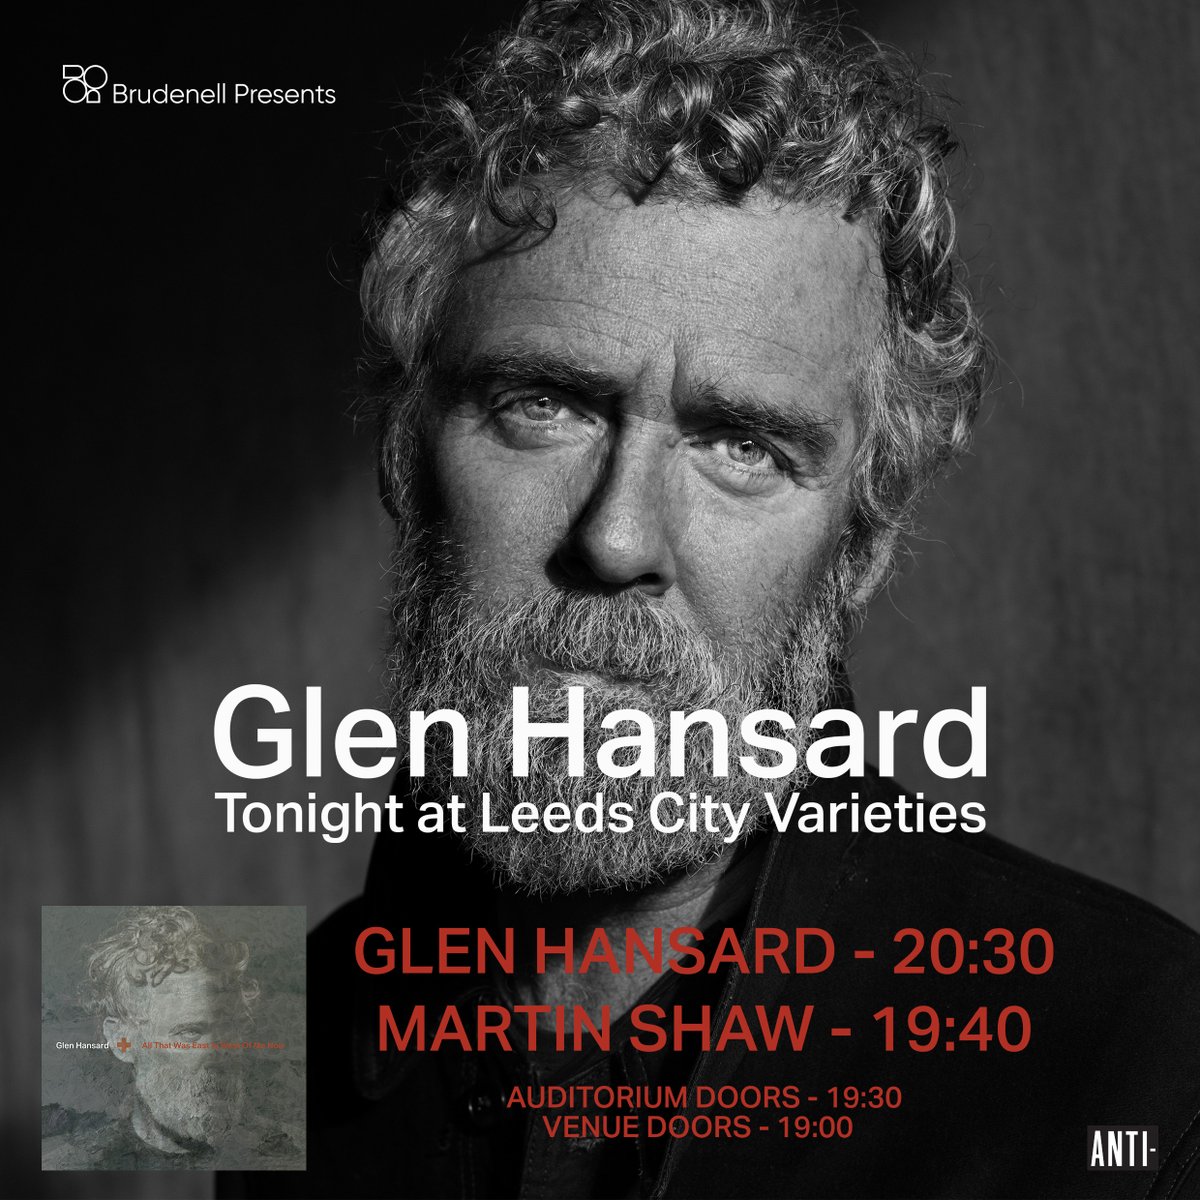 This evening we host the incredible @Glen_Hansard at @CityVarieties and it's completely sold out! Stage times are below for those of you lucky enough to have a ticket. 👇 19:00 - Venue Doors 19:30 - Auditorium Doors 19:40 - Martin Shaw 20:30 - Glen Hansard See you tonight! 🎉